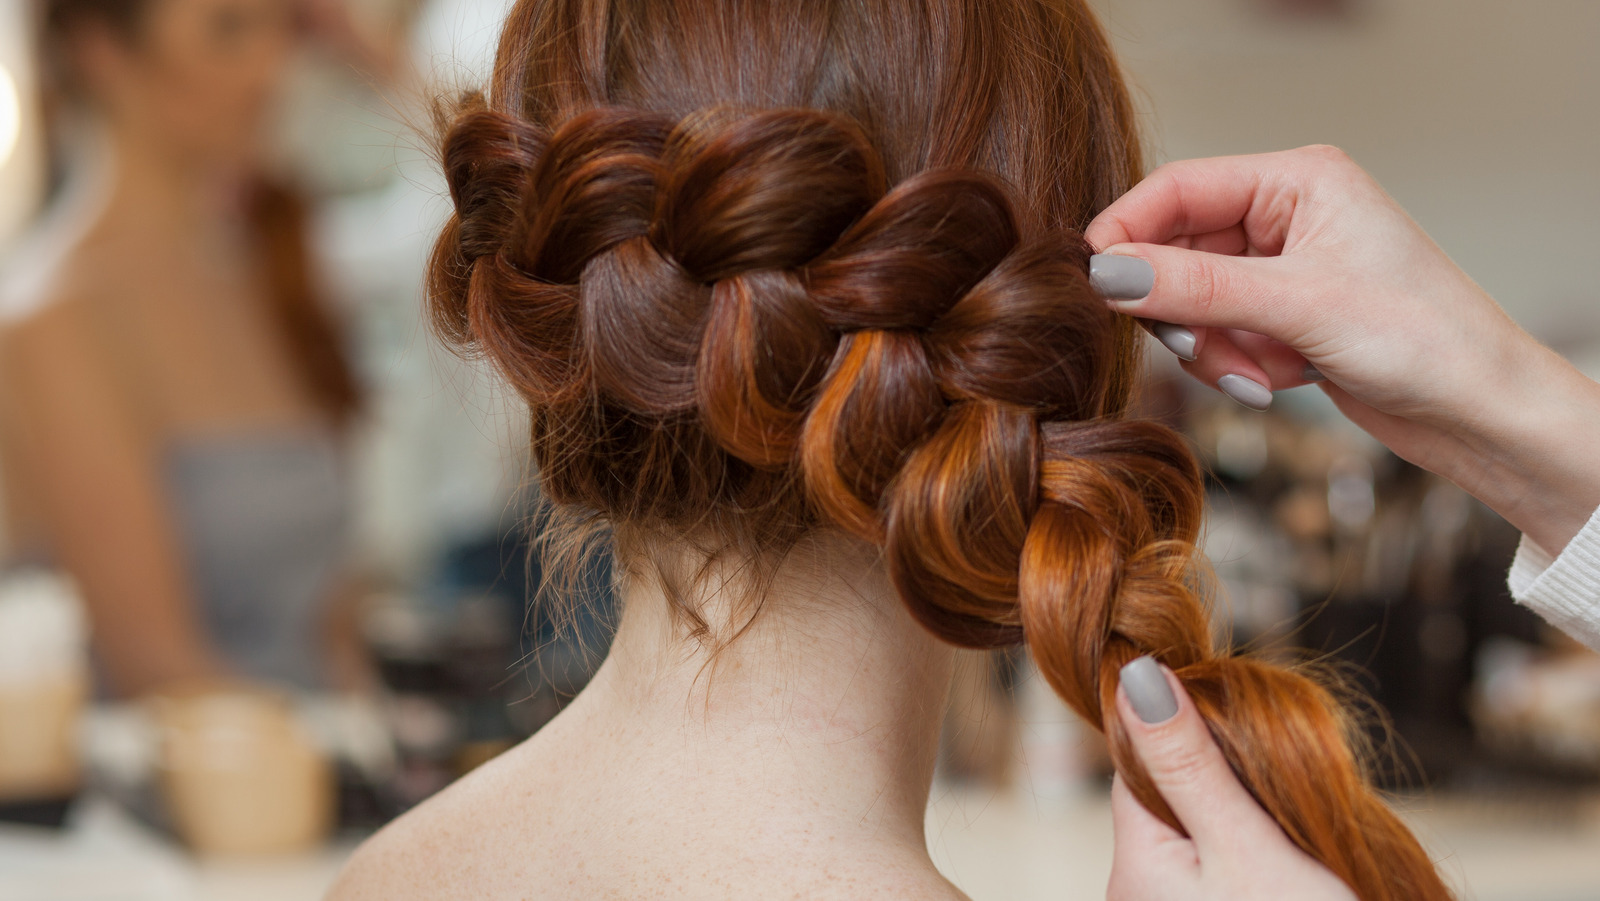 French Braid vs. Dutch Braid: What's the Difference?